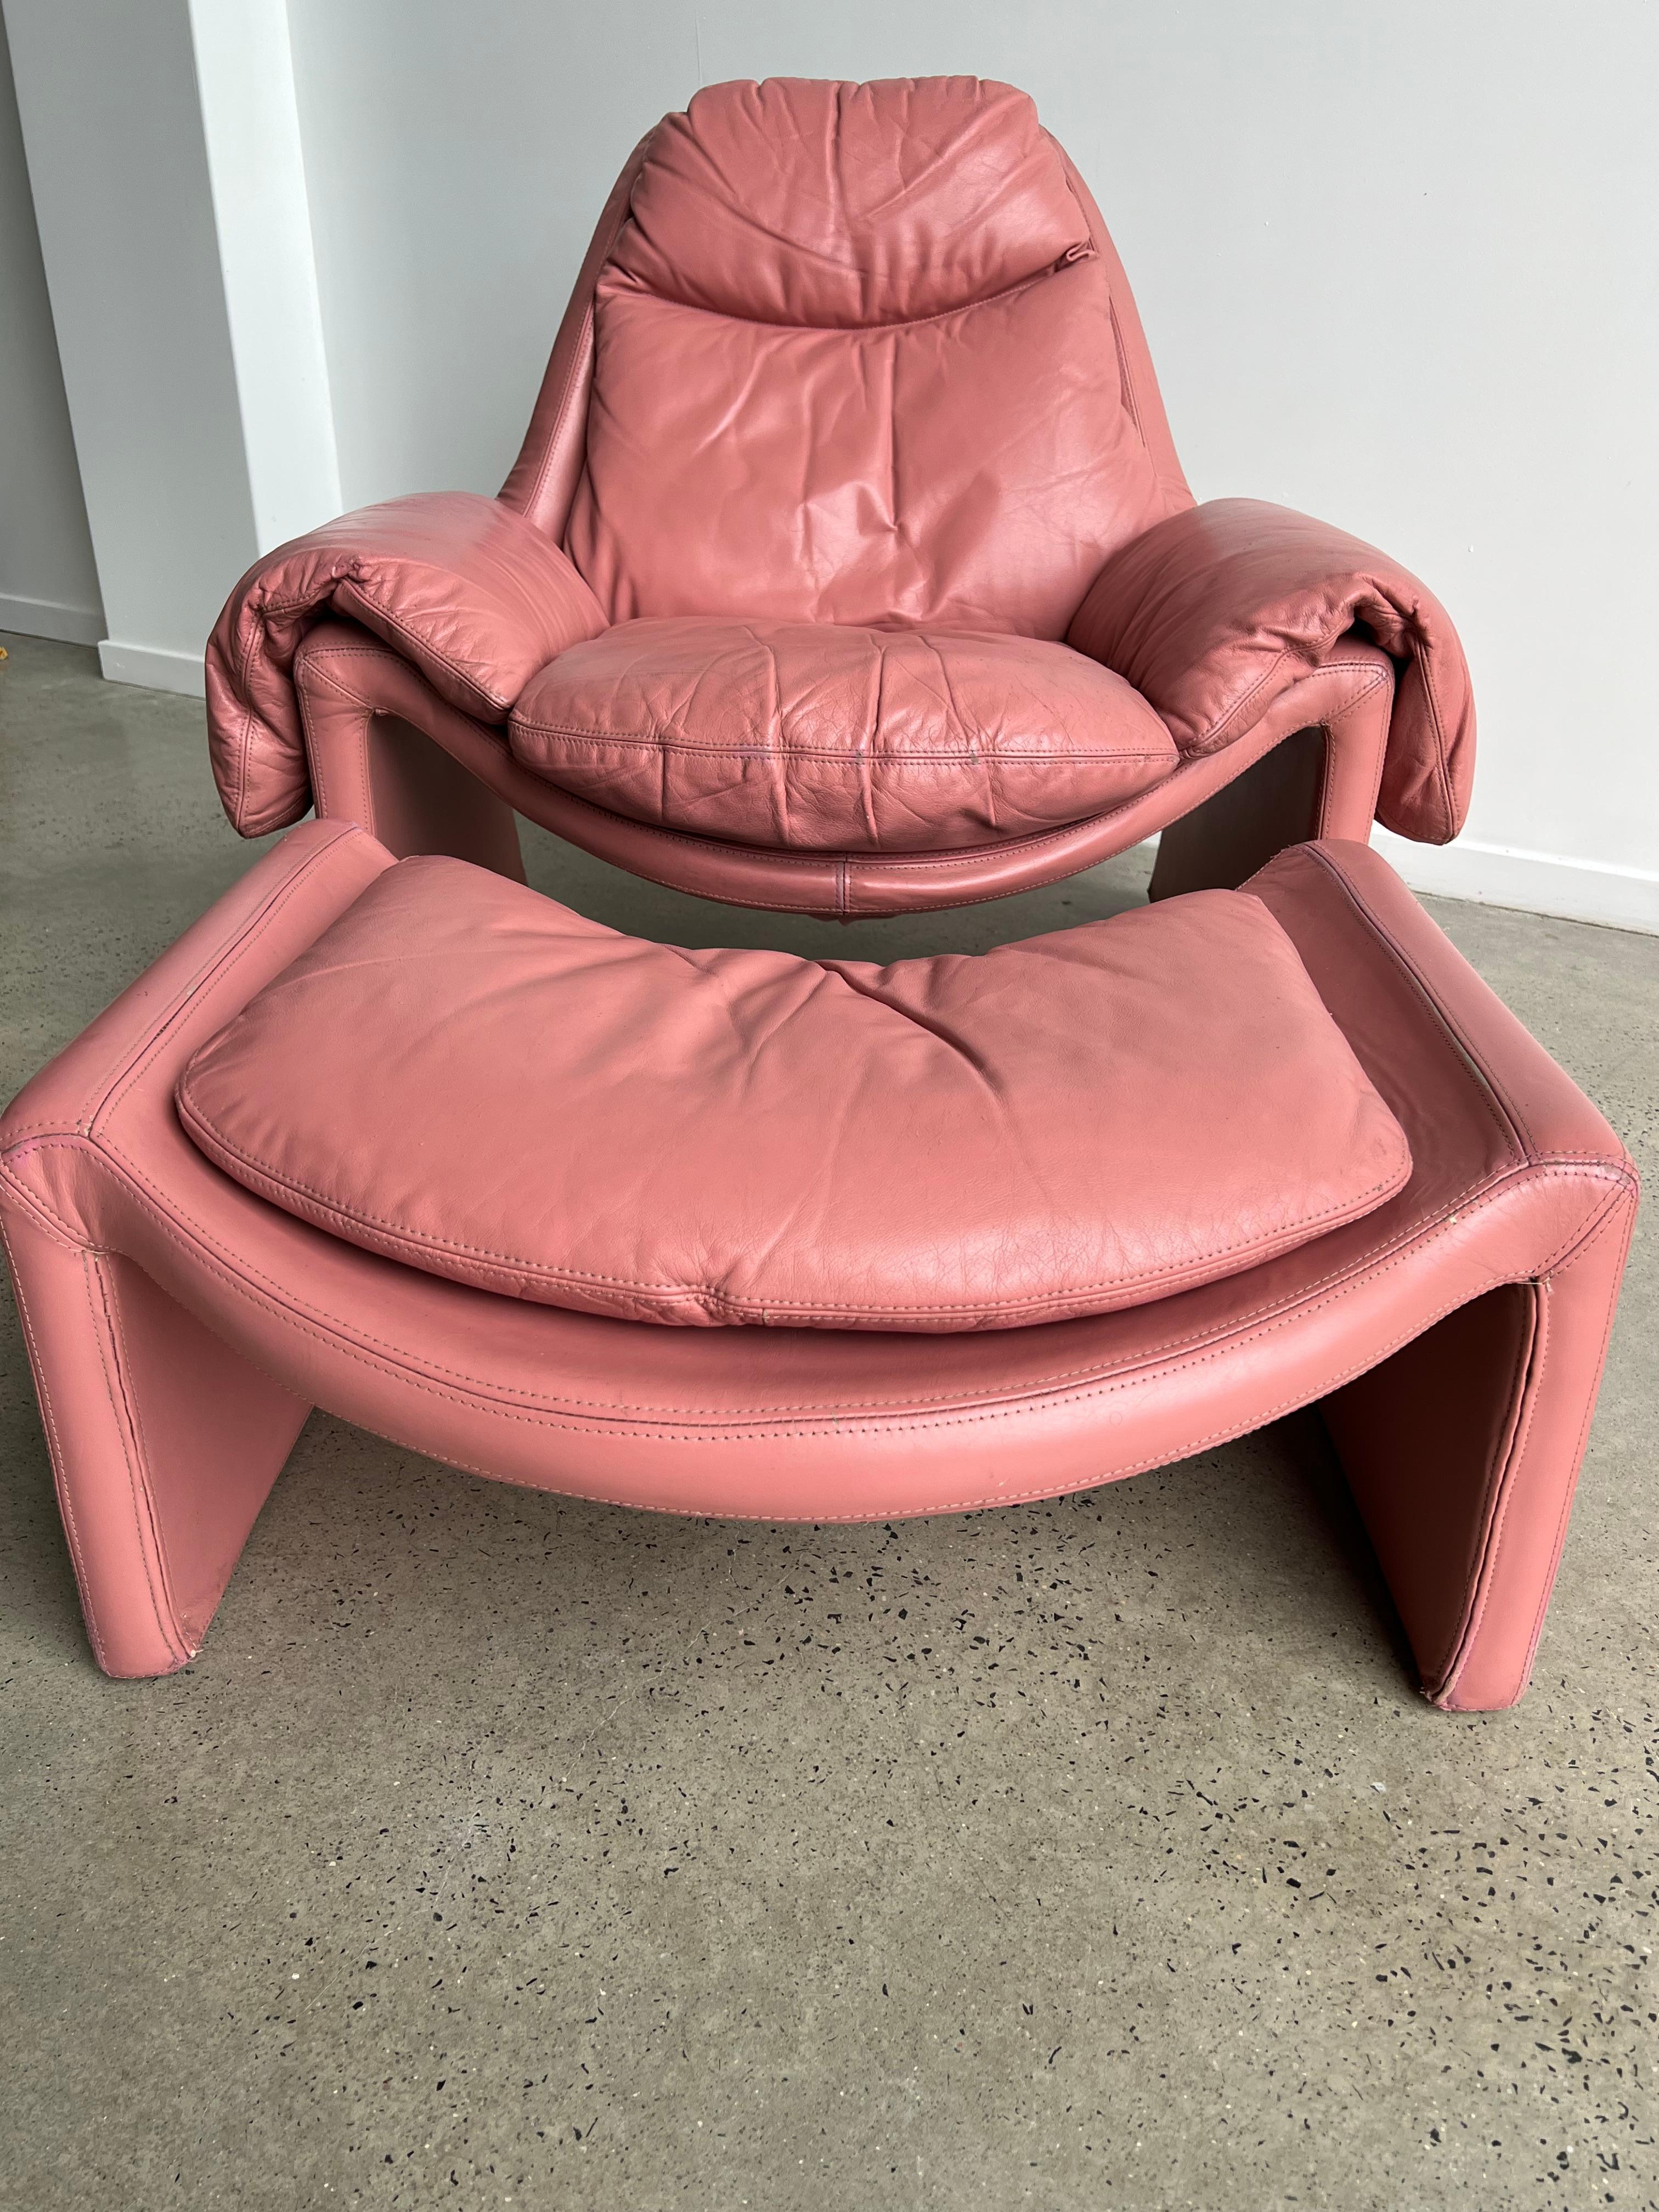 Mid-Century Modern Italian Leather Pink P60 Chair by Vittorio Introini for Saporiti Italia, 1962 For Sale